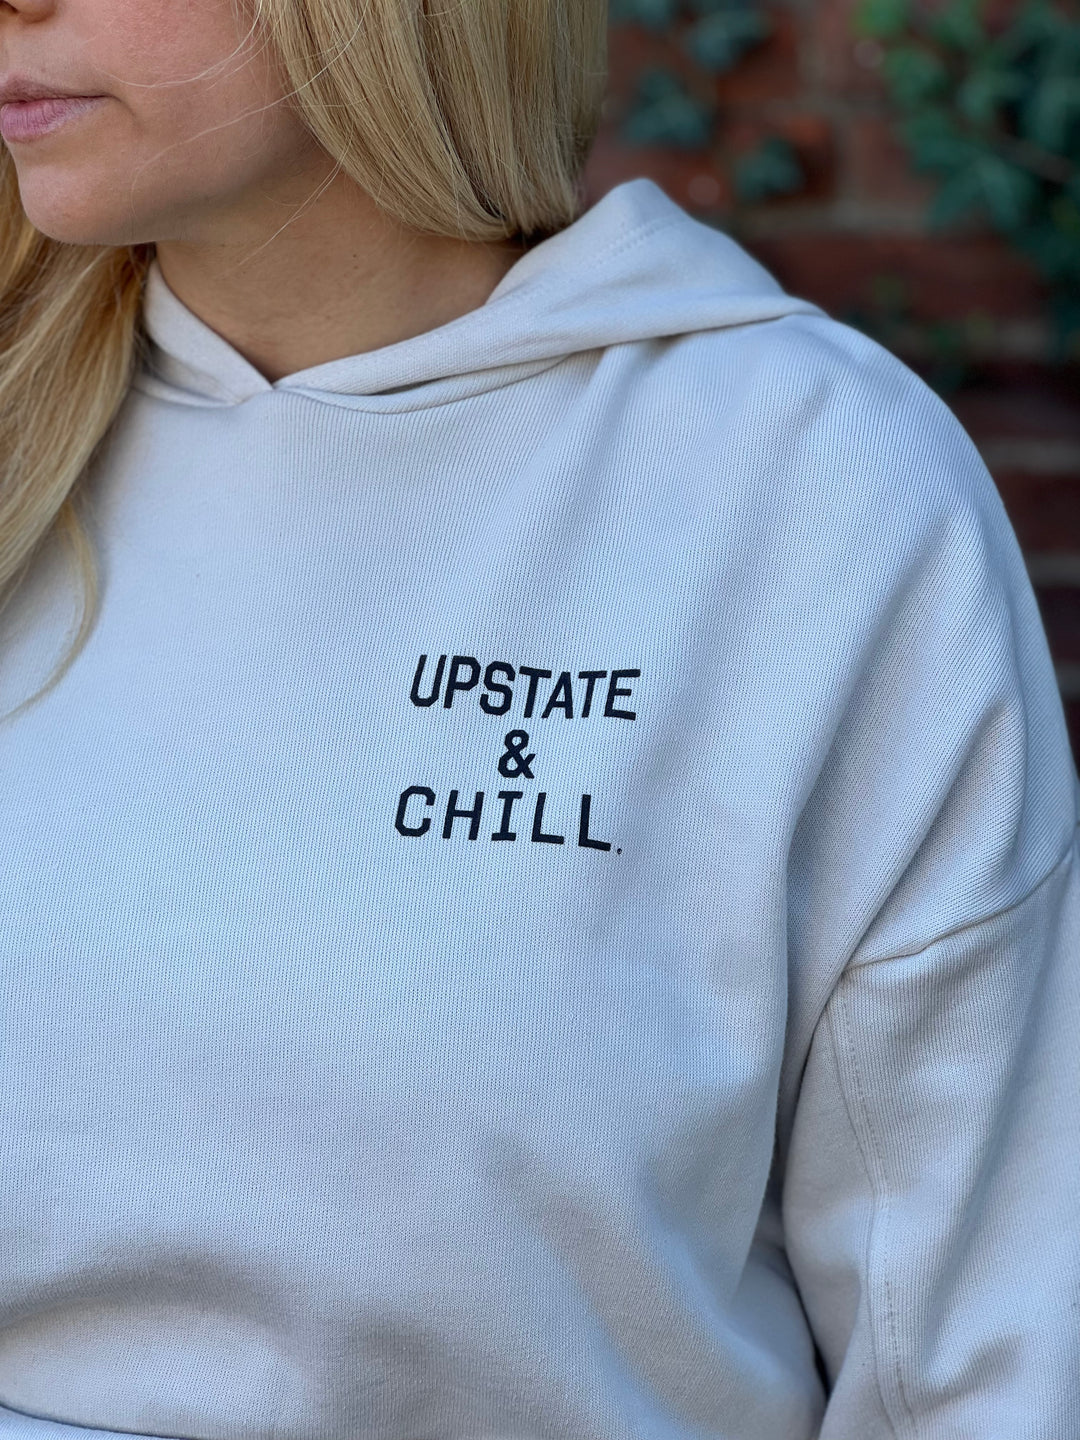 The Women's Heart : Upstate & Chill®